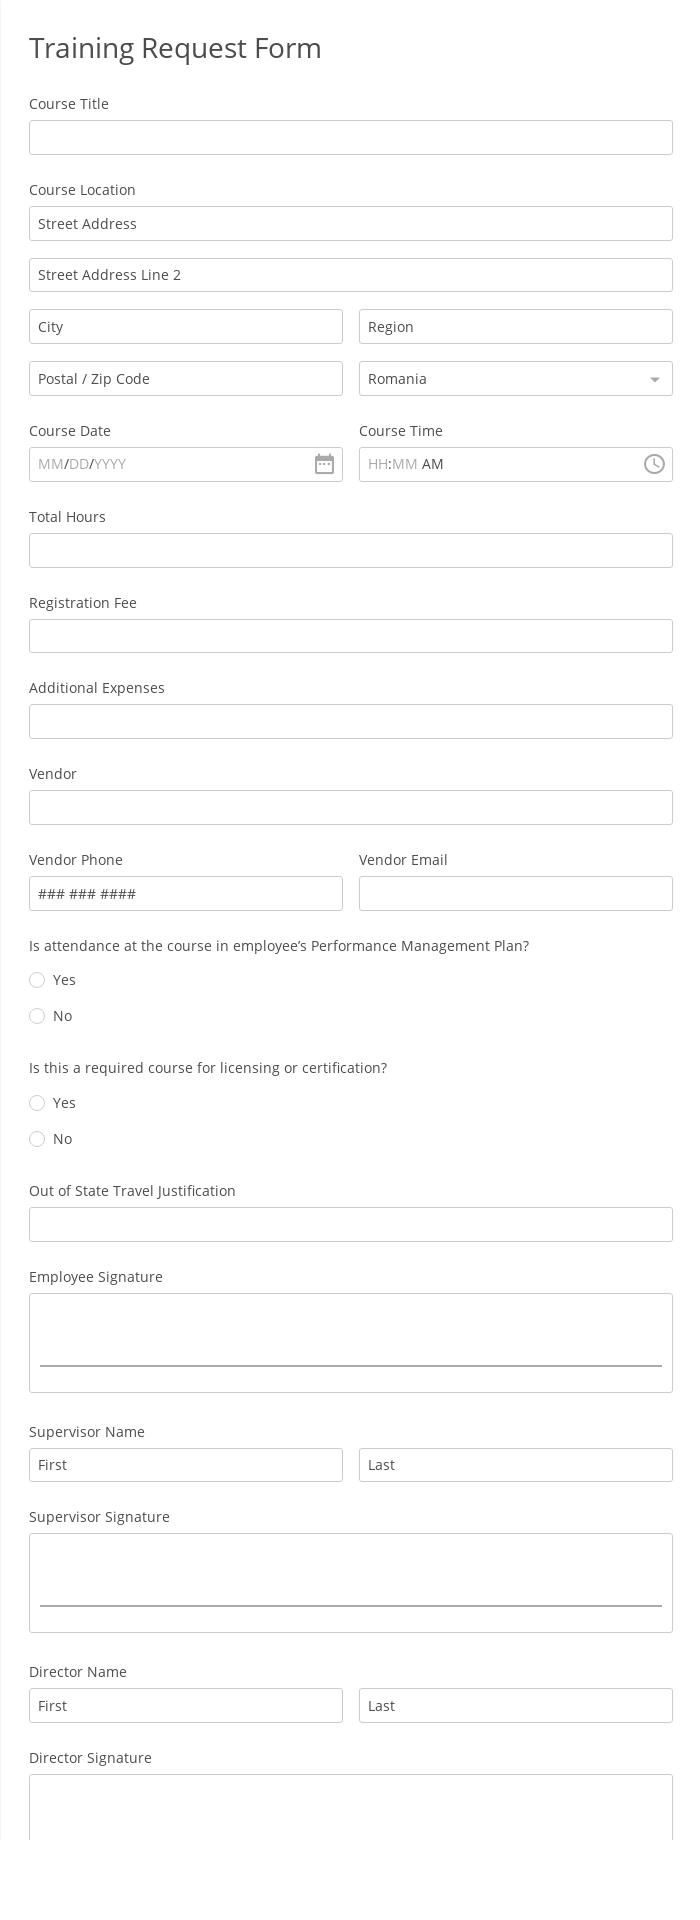 Training Request Form